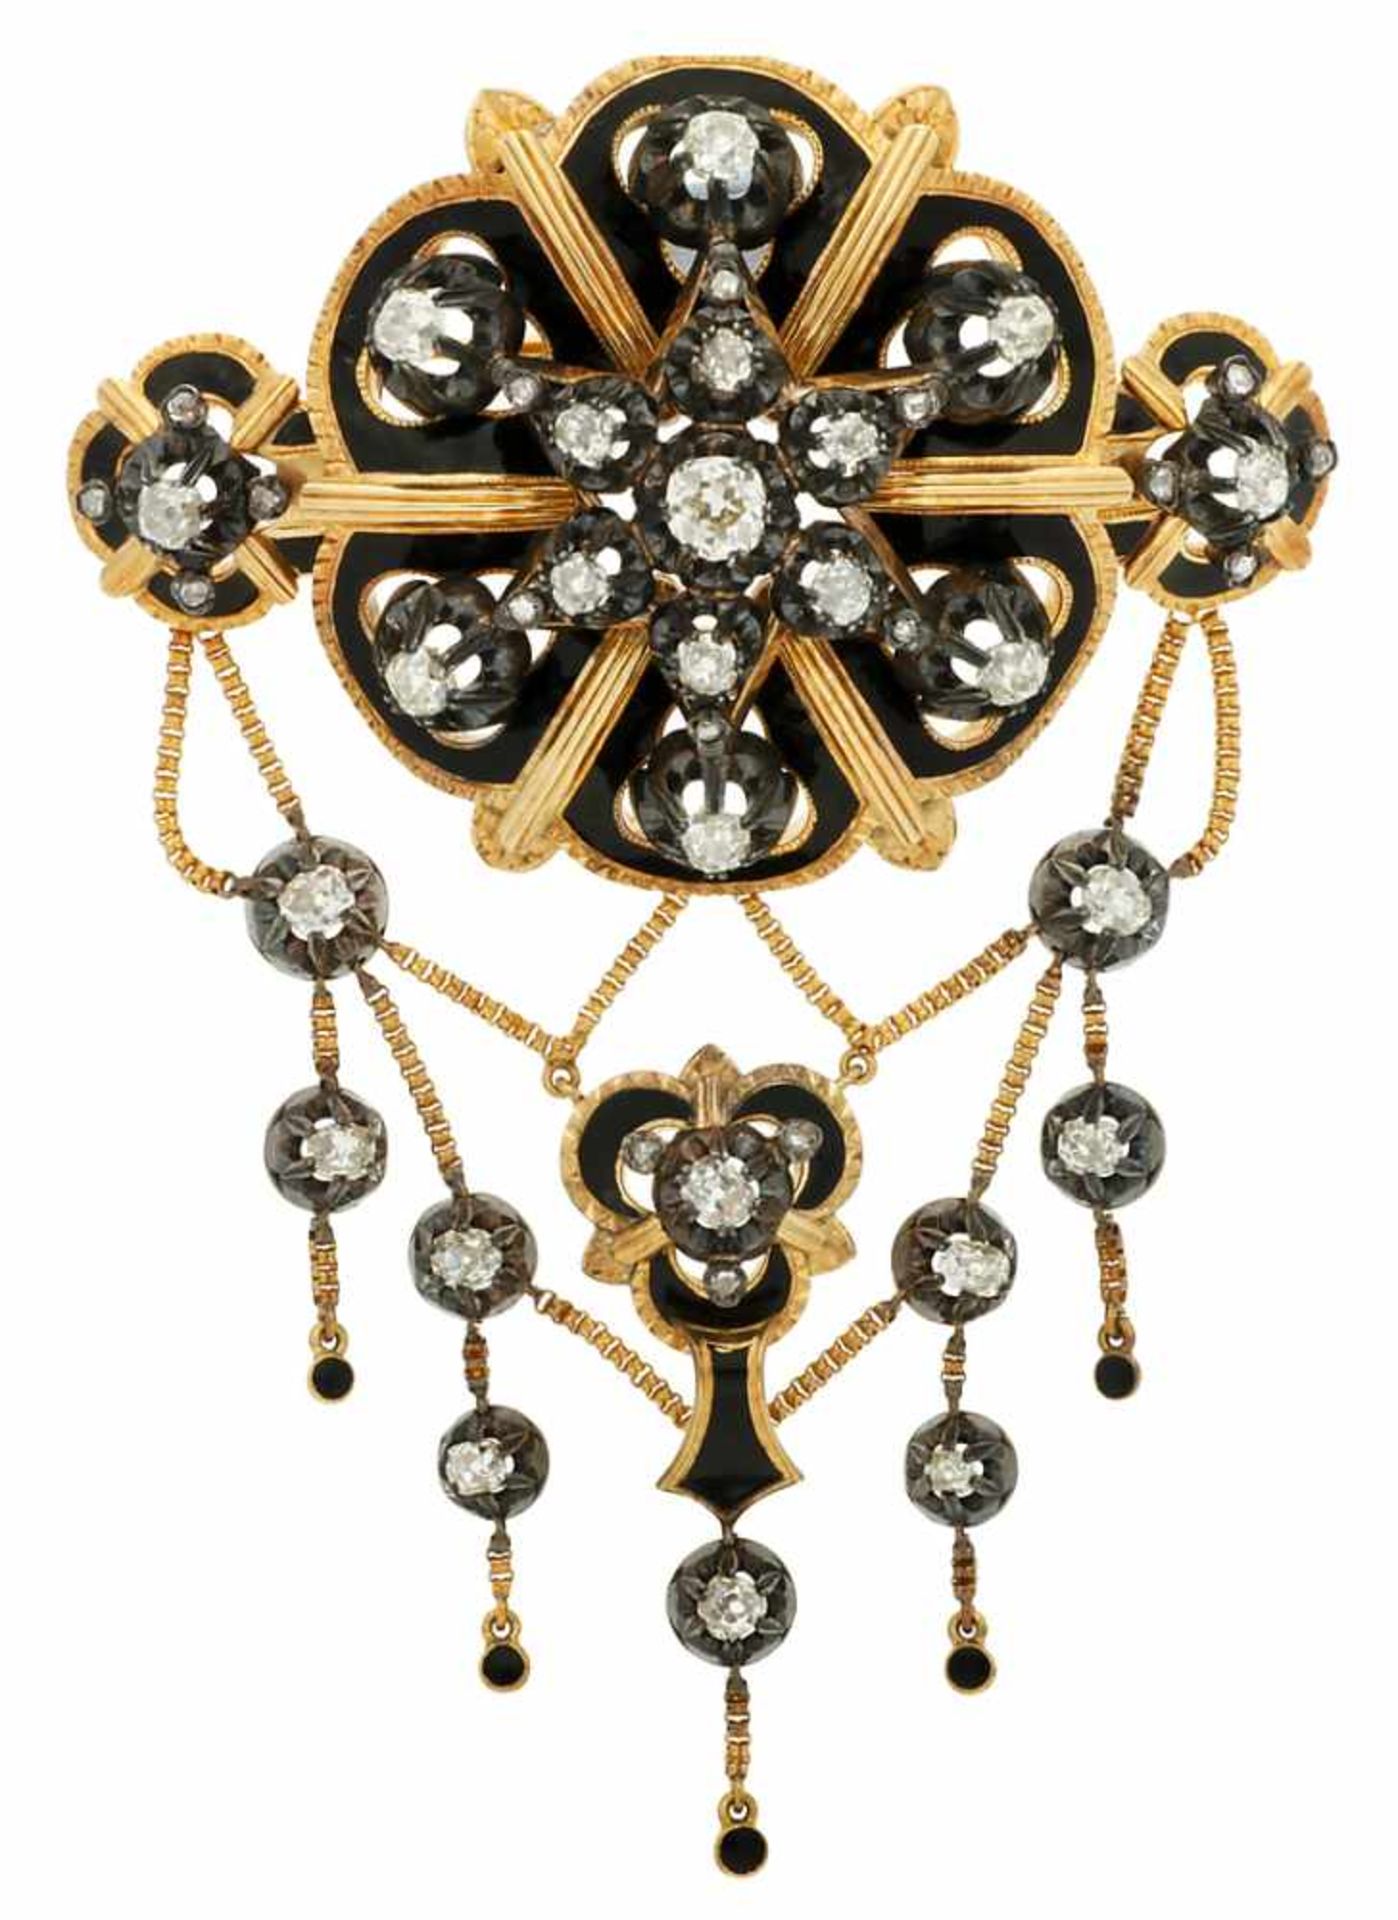 French diamonds brooch, circa 1870.Gold with silver applications, black enamel and old brilliant,